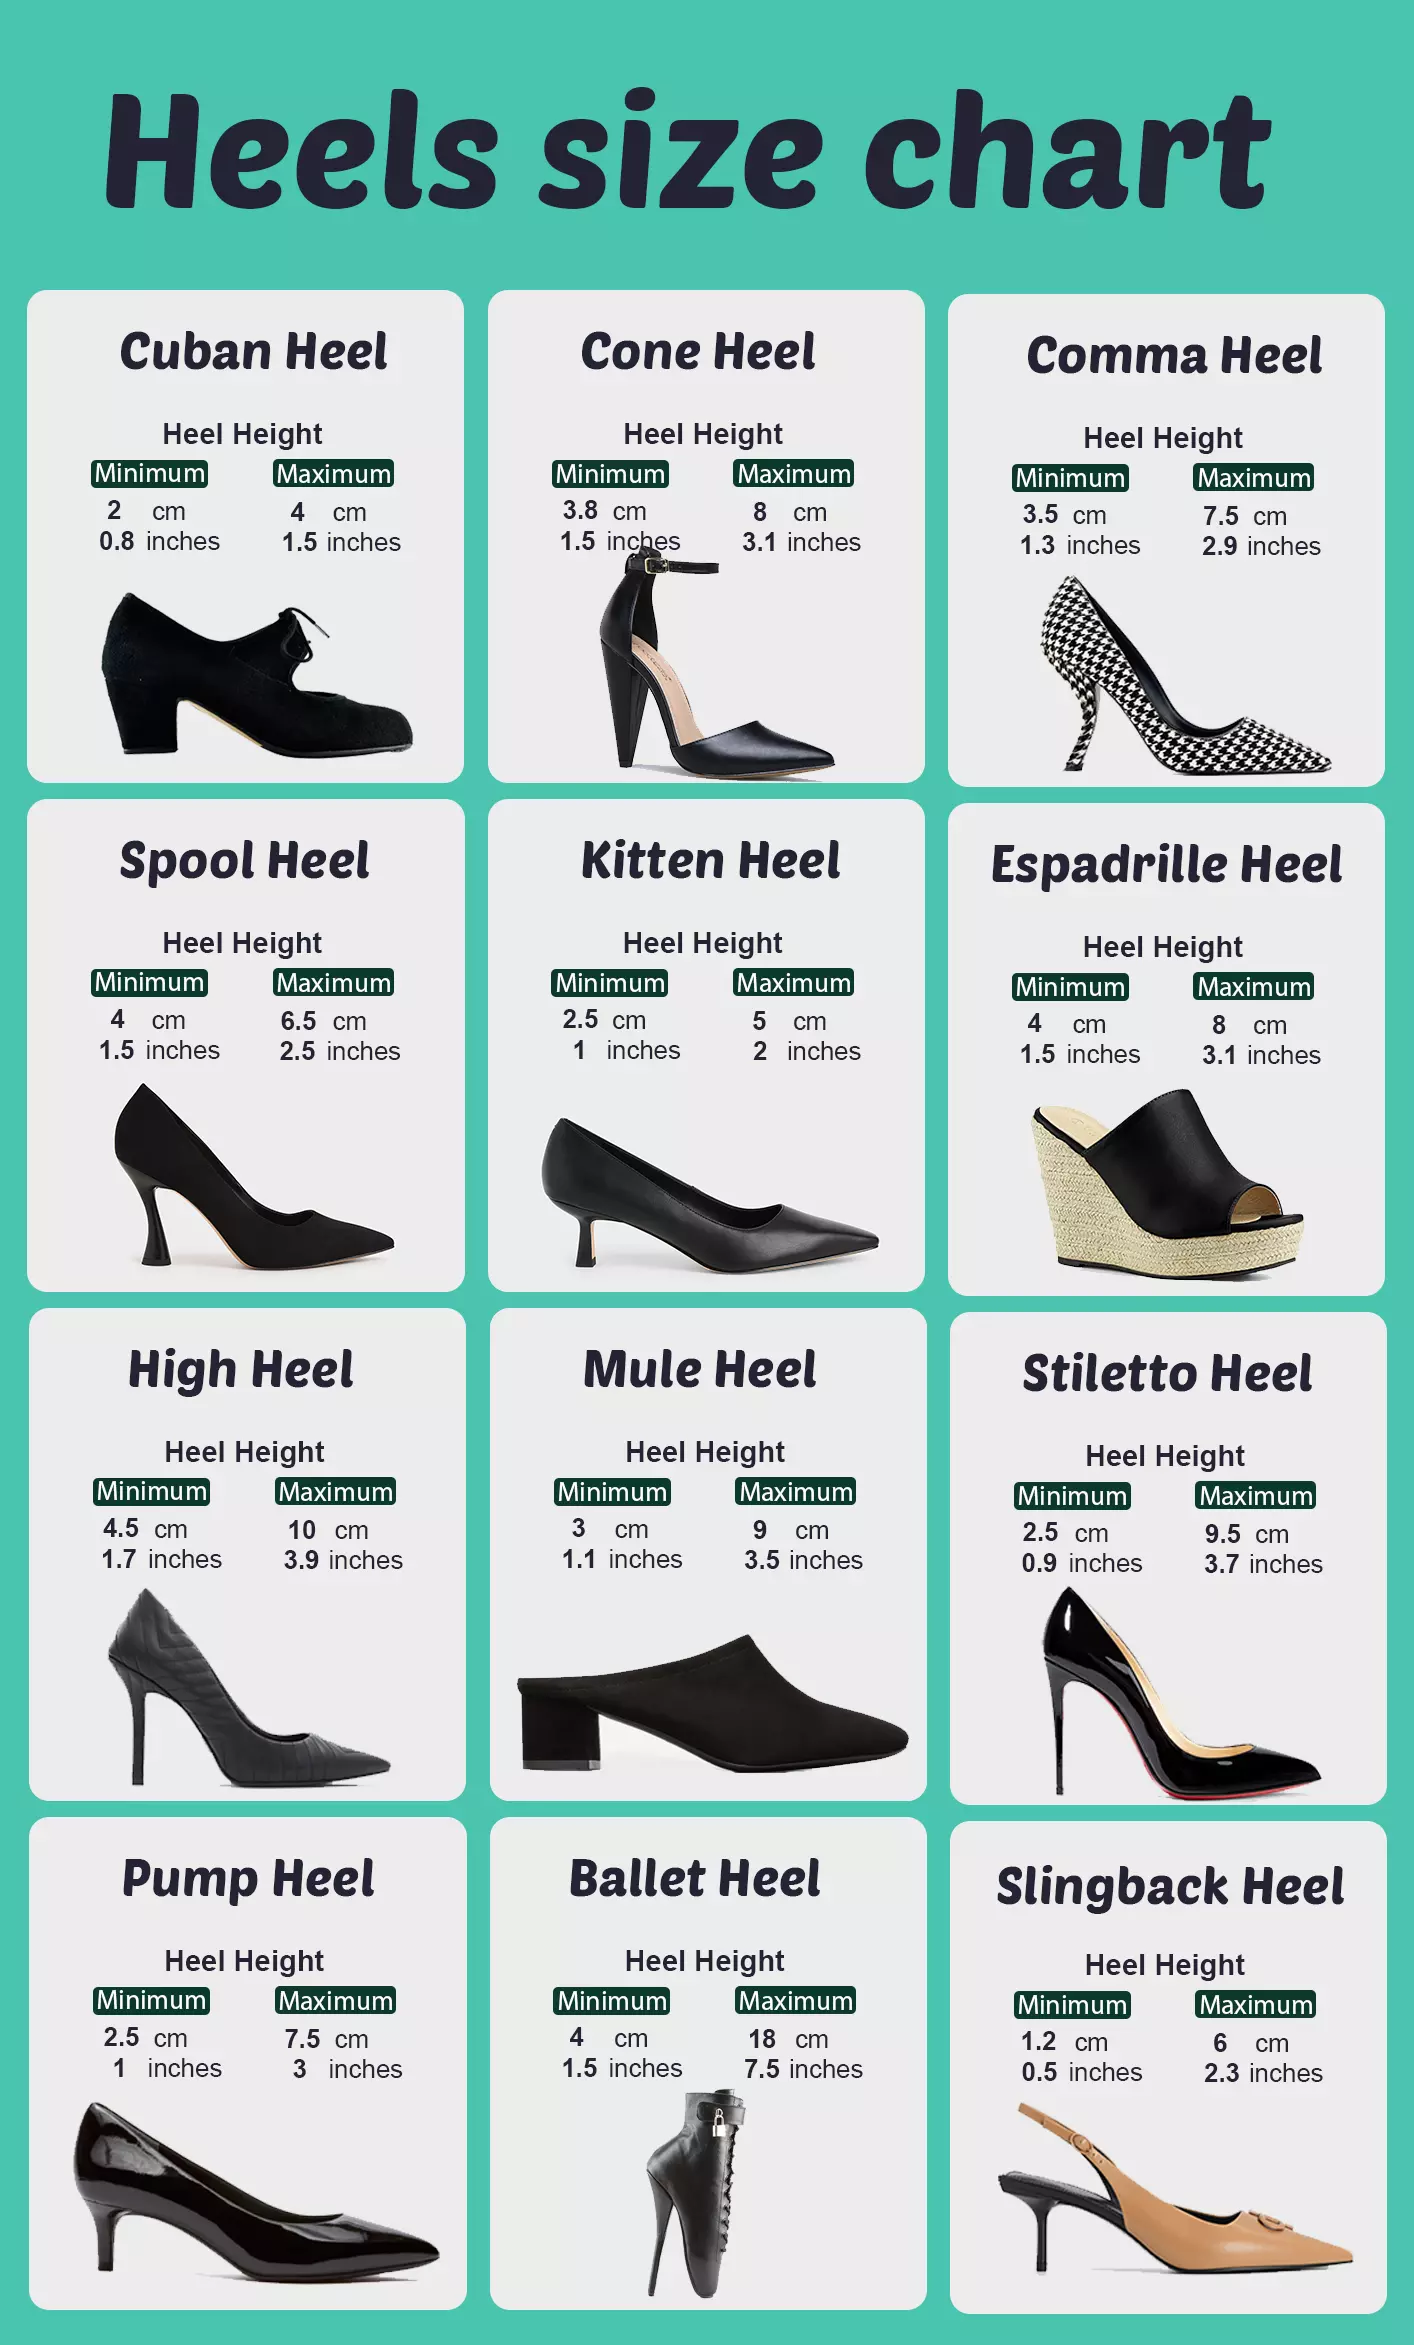 12 different types of heels height in cm and inches